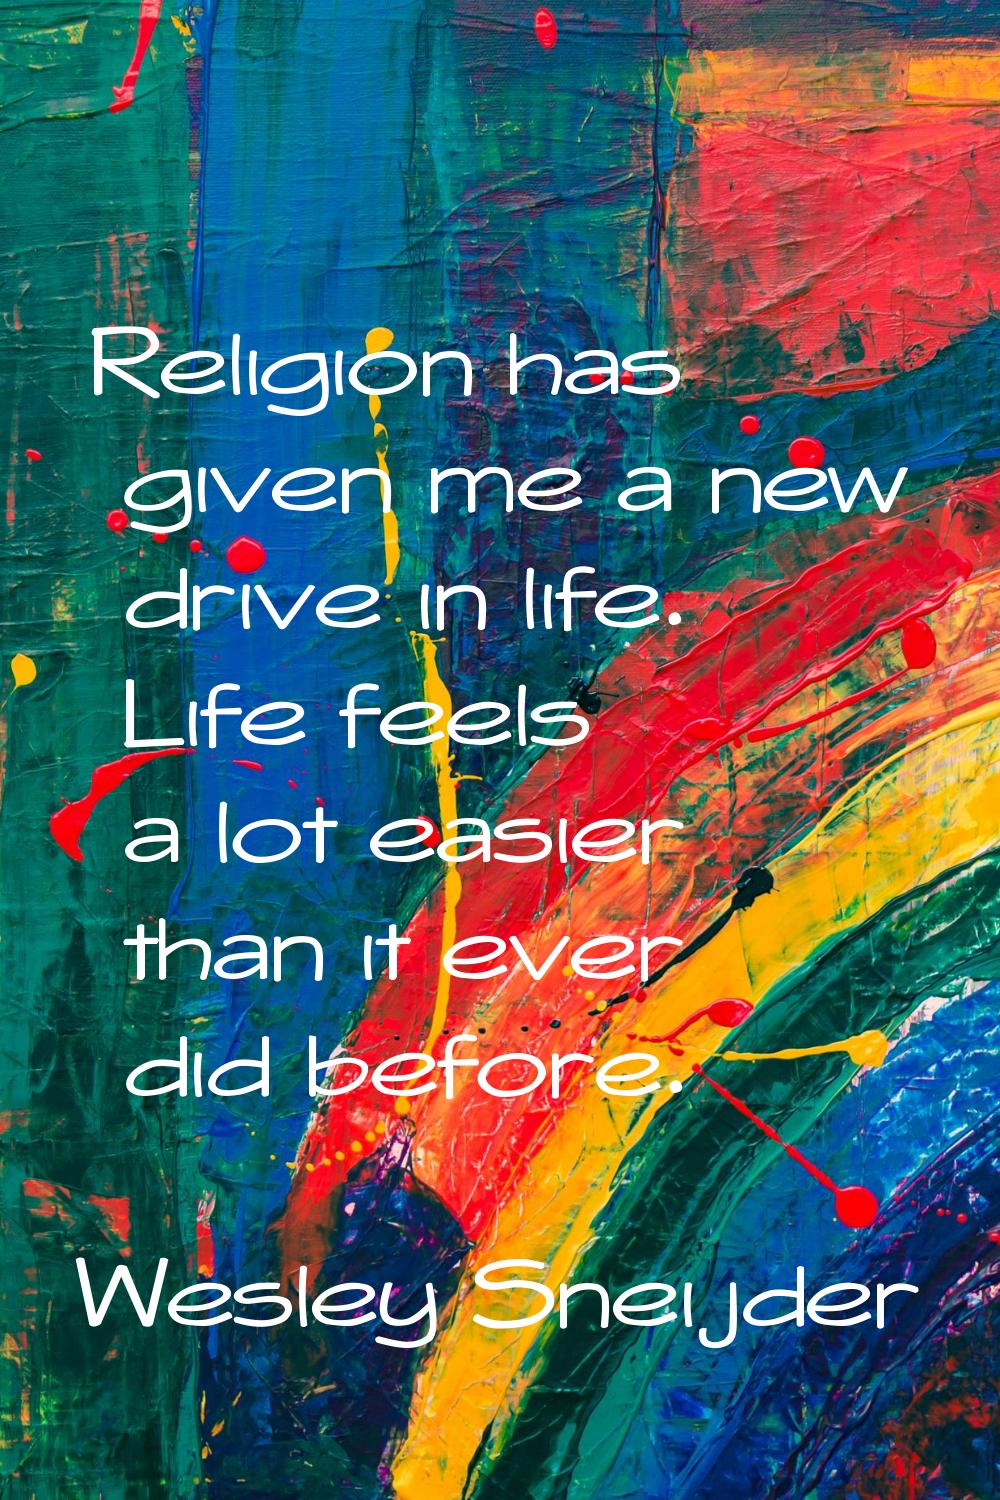 Religion has given me a new drive in life. Life feels a lot easier than it ever did before.